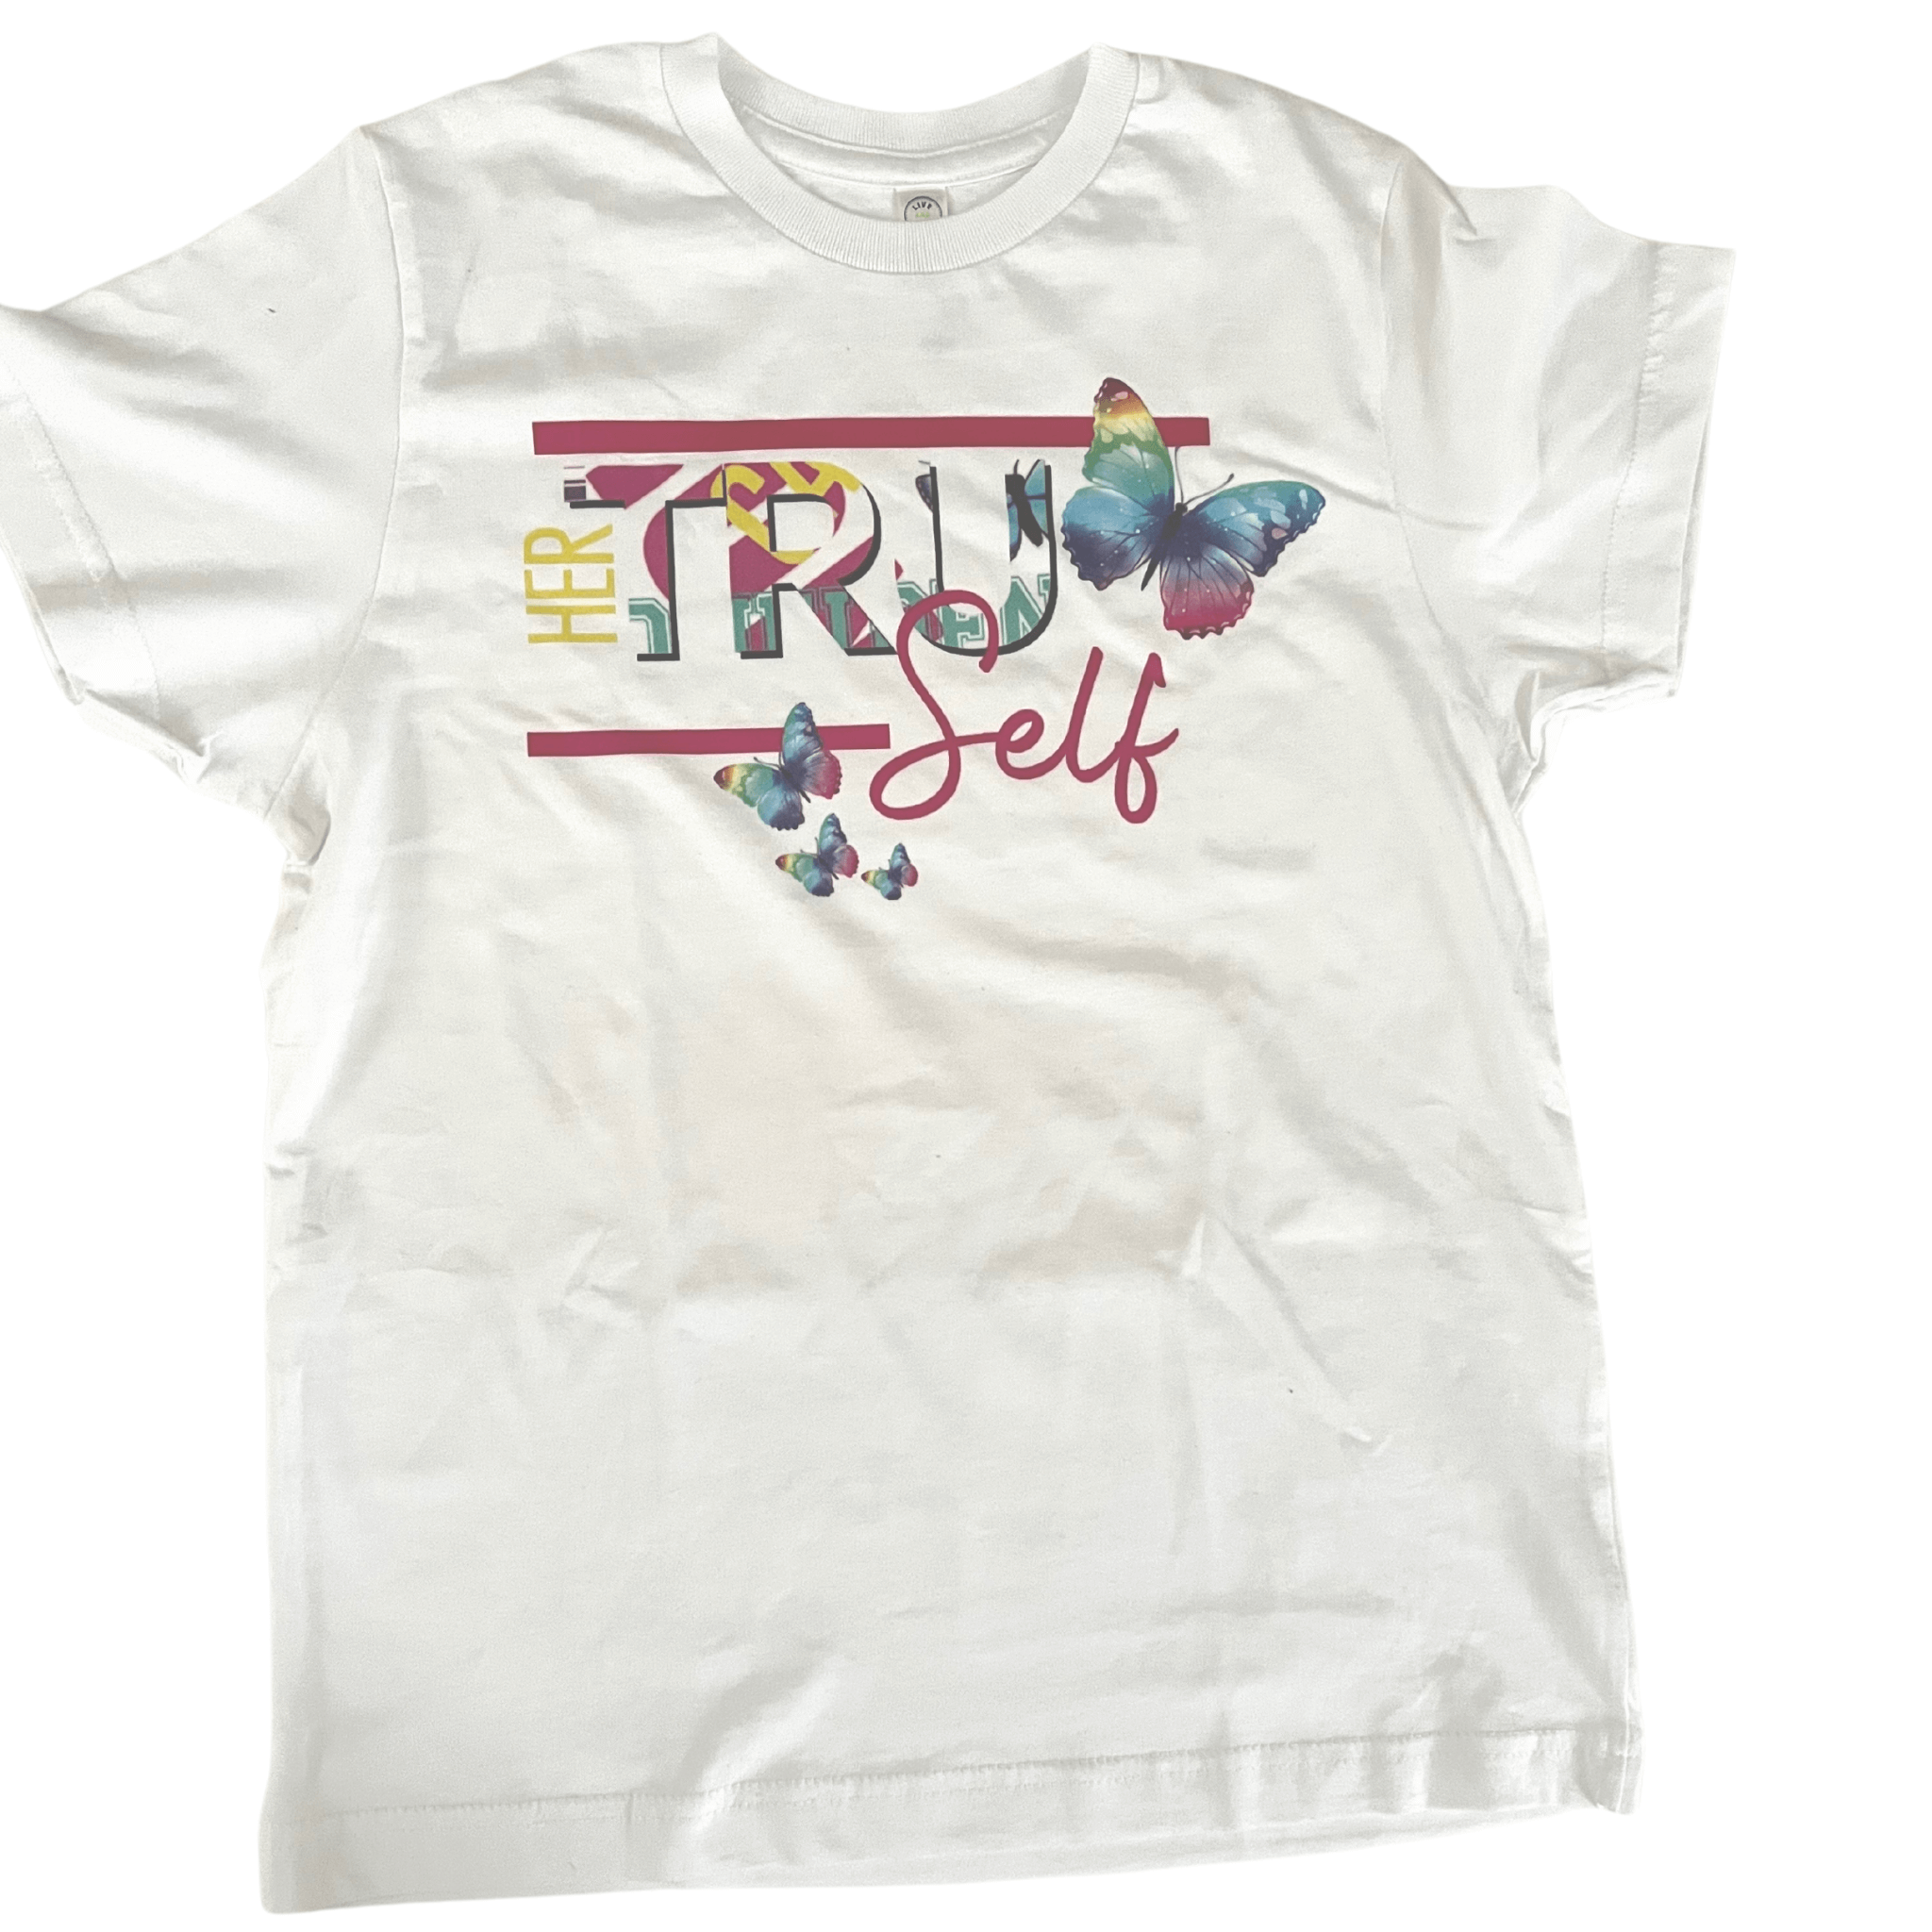 This is our designed T-shirt.  The t-shirt comes in sizes from Youth XS to Youth XL.